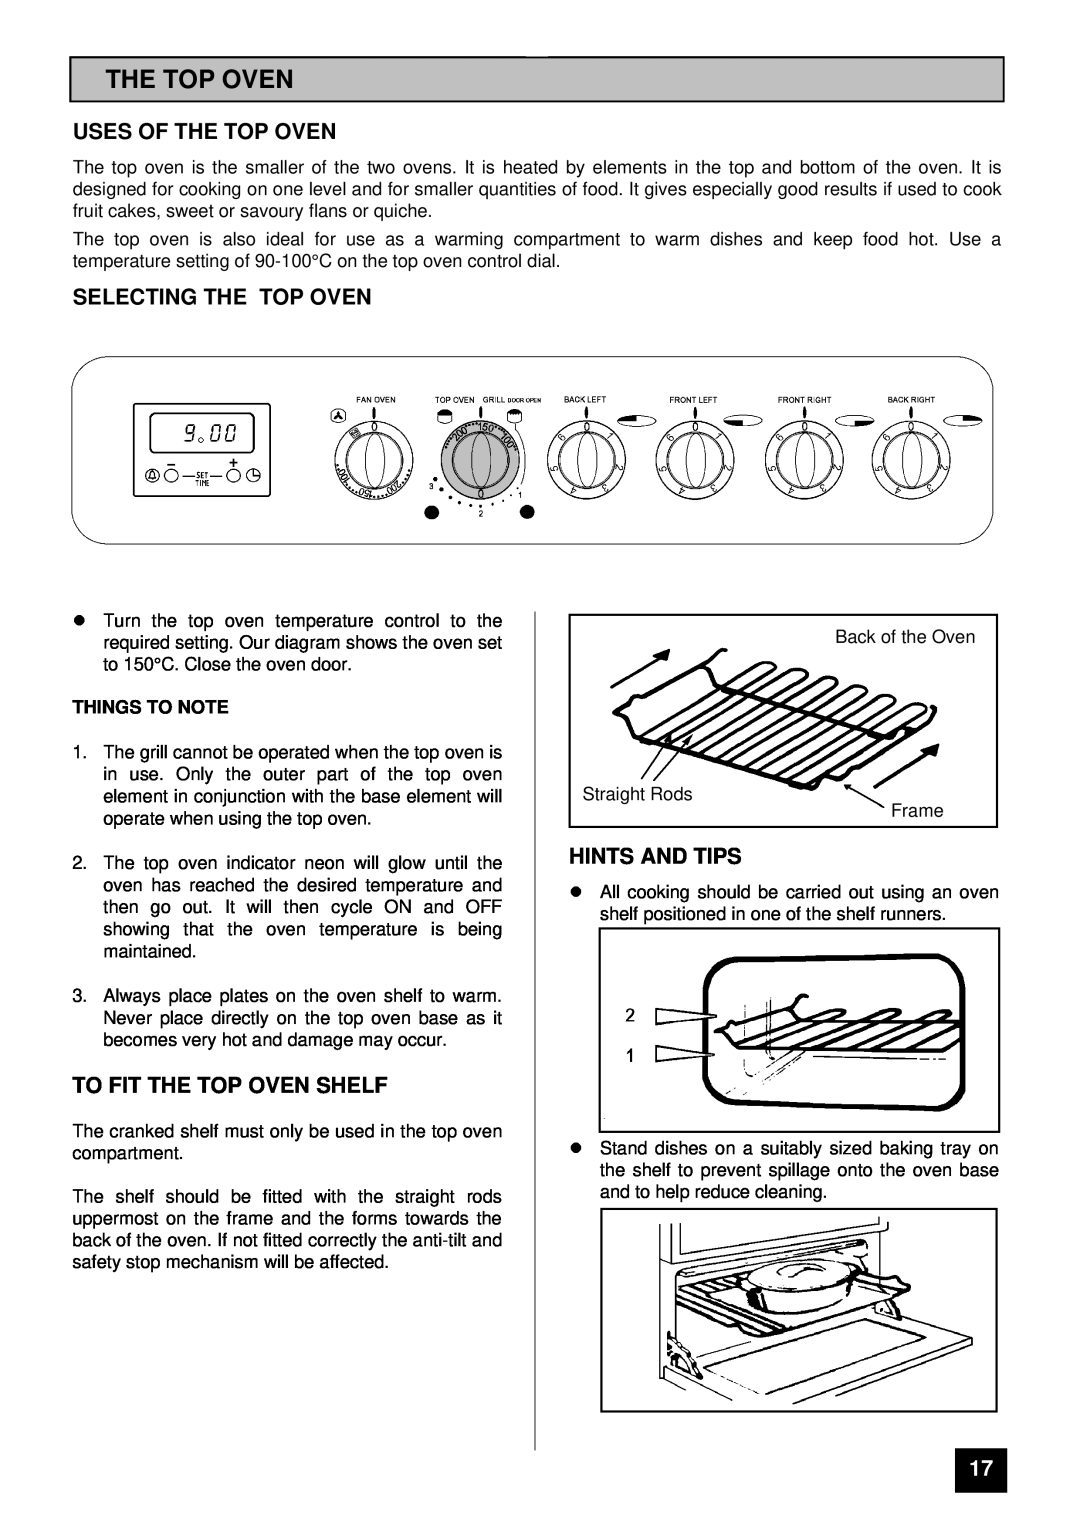 Tricity Bendix SI 322, SI 323 Uses Of The Top Oven, Selecting The Top Oven, To Fit The Top Oven Shelf, lHINTS AND TIPS 